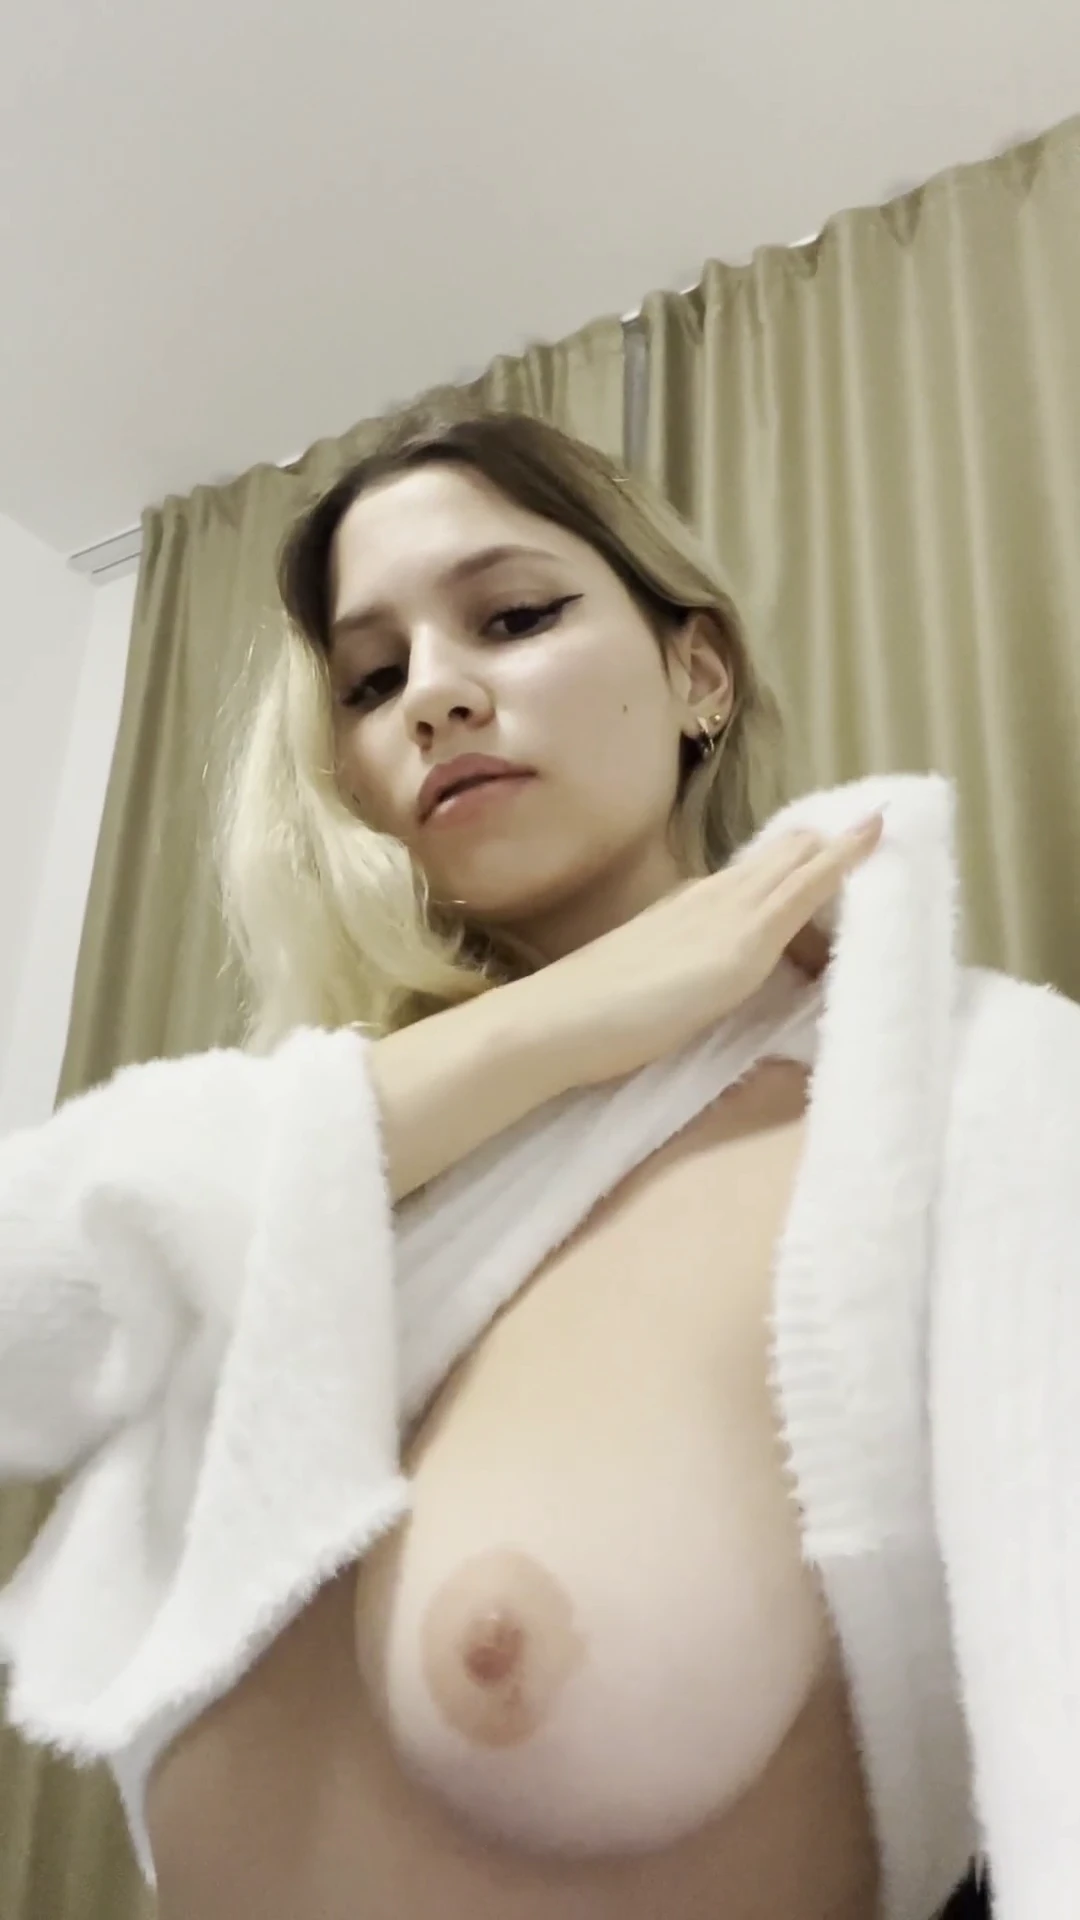 I know you'd shoot your load on my huge natural boobs [Gif]